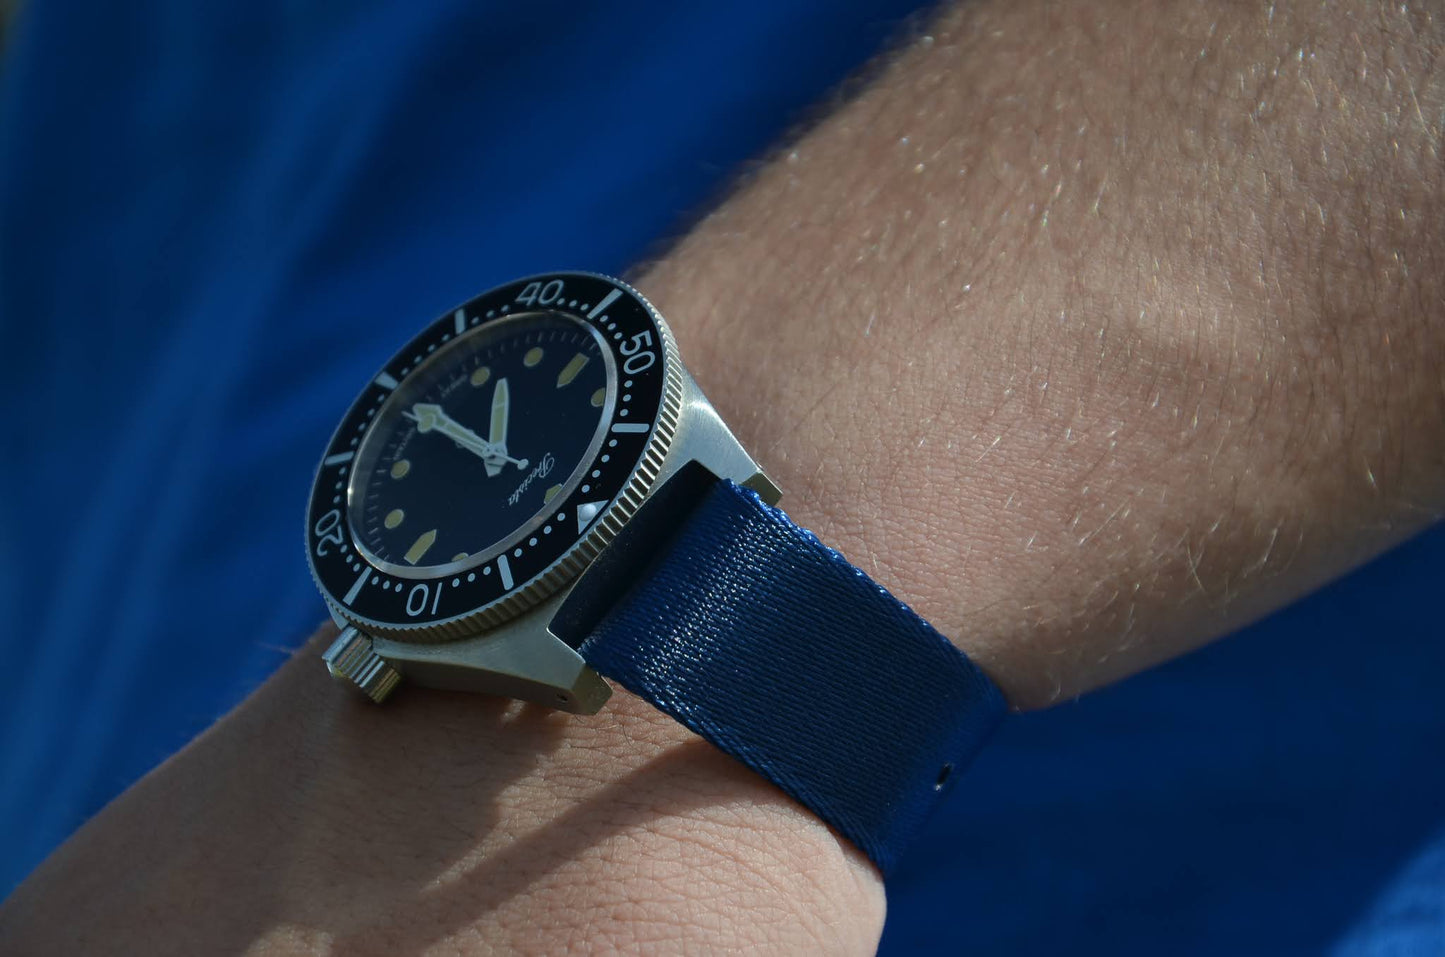 The 'Blue Bomber' - Blue adjustable military watch strap made of a soft seat belt nylon